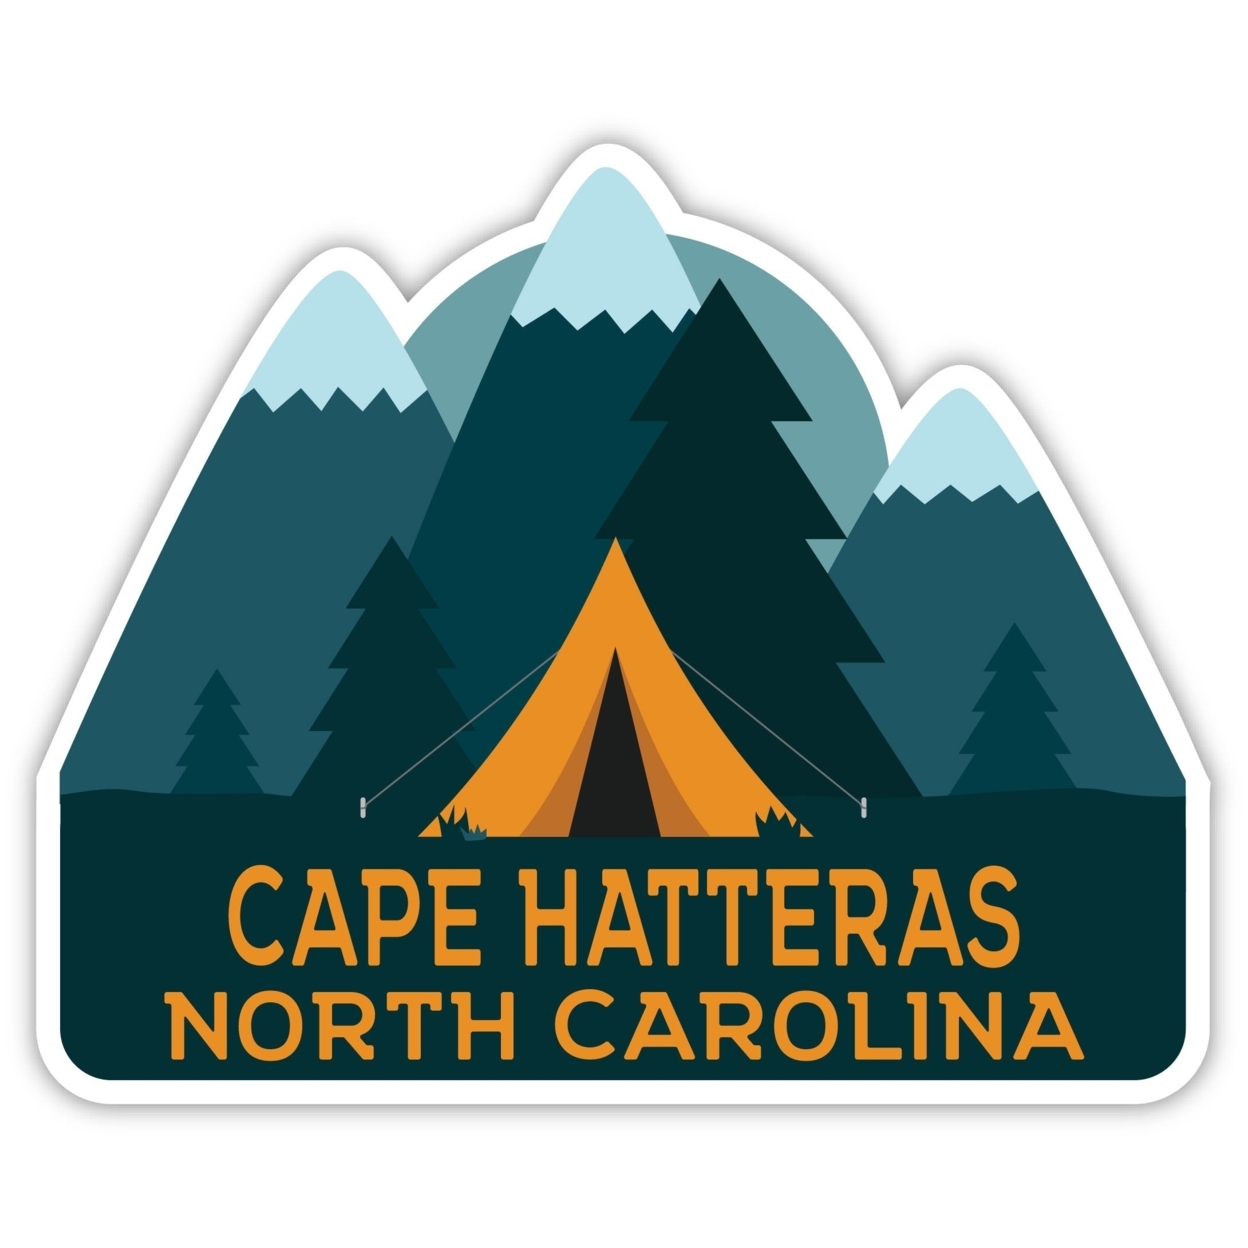 Cape Hatteras North Carolina Souvenir Decorative Stickers (Choose Theme And Size) - 4-Pack, 8-Inch, Tent